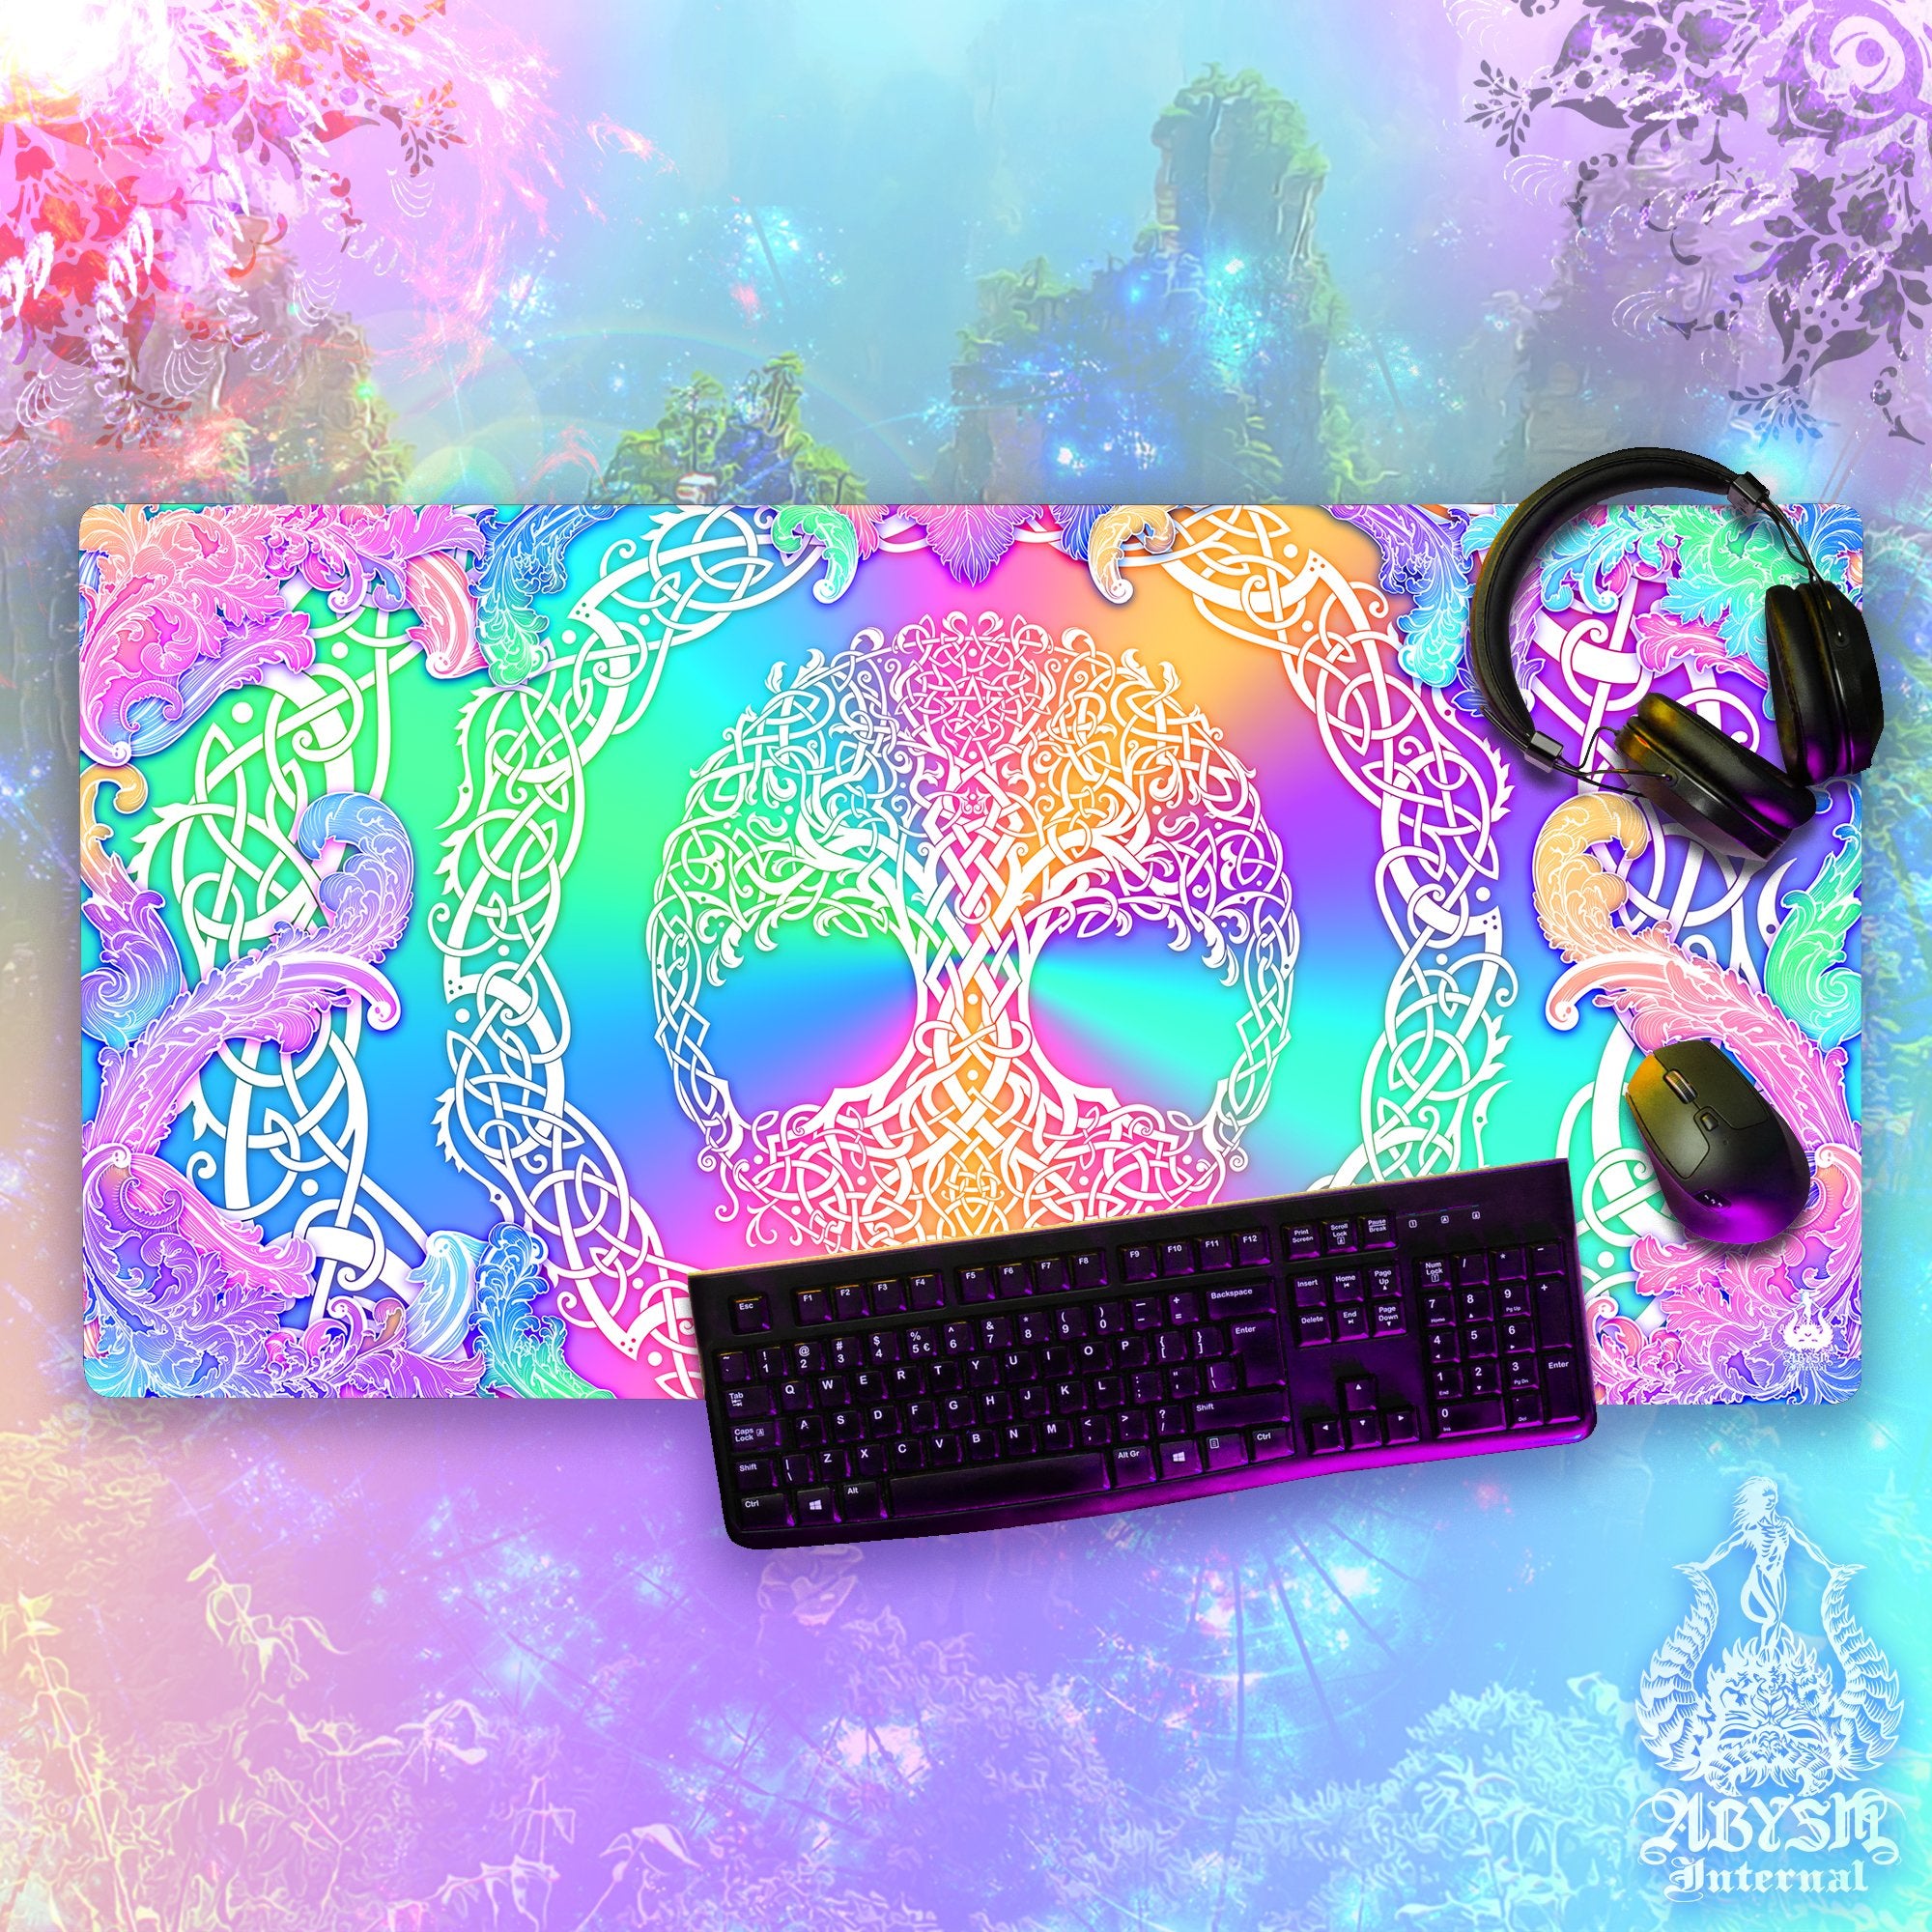 Colorful Gaming Desk Mat, Celtic Knotwork Mouse Pad, Girl Gamer, Tree of Life Table Protector Cover, Witchy Pastel Workpad, Wicca Art Print - Abysm Internal